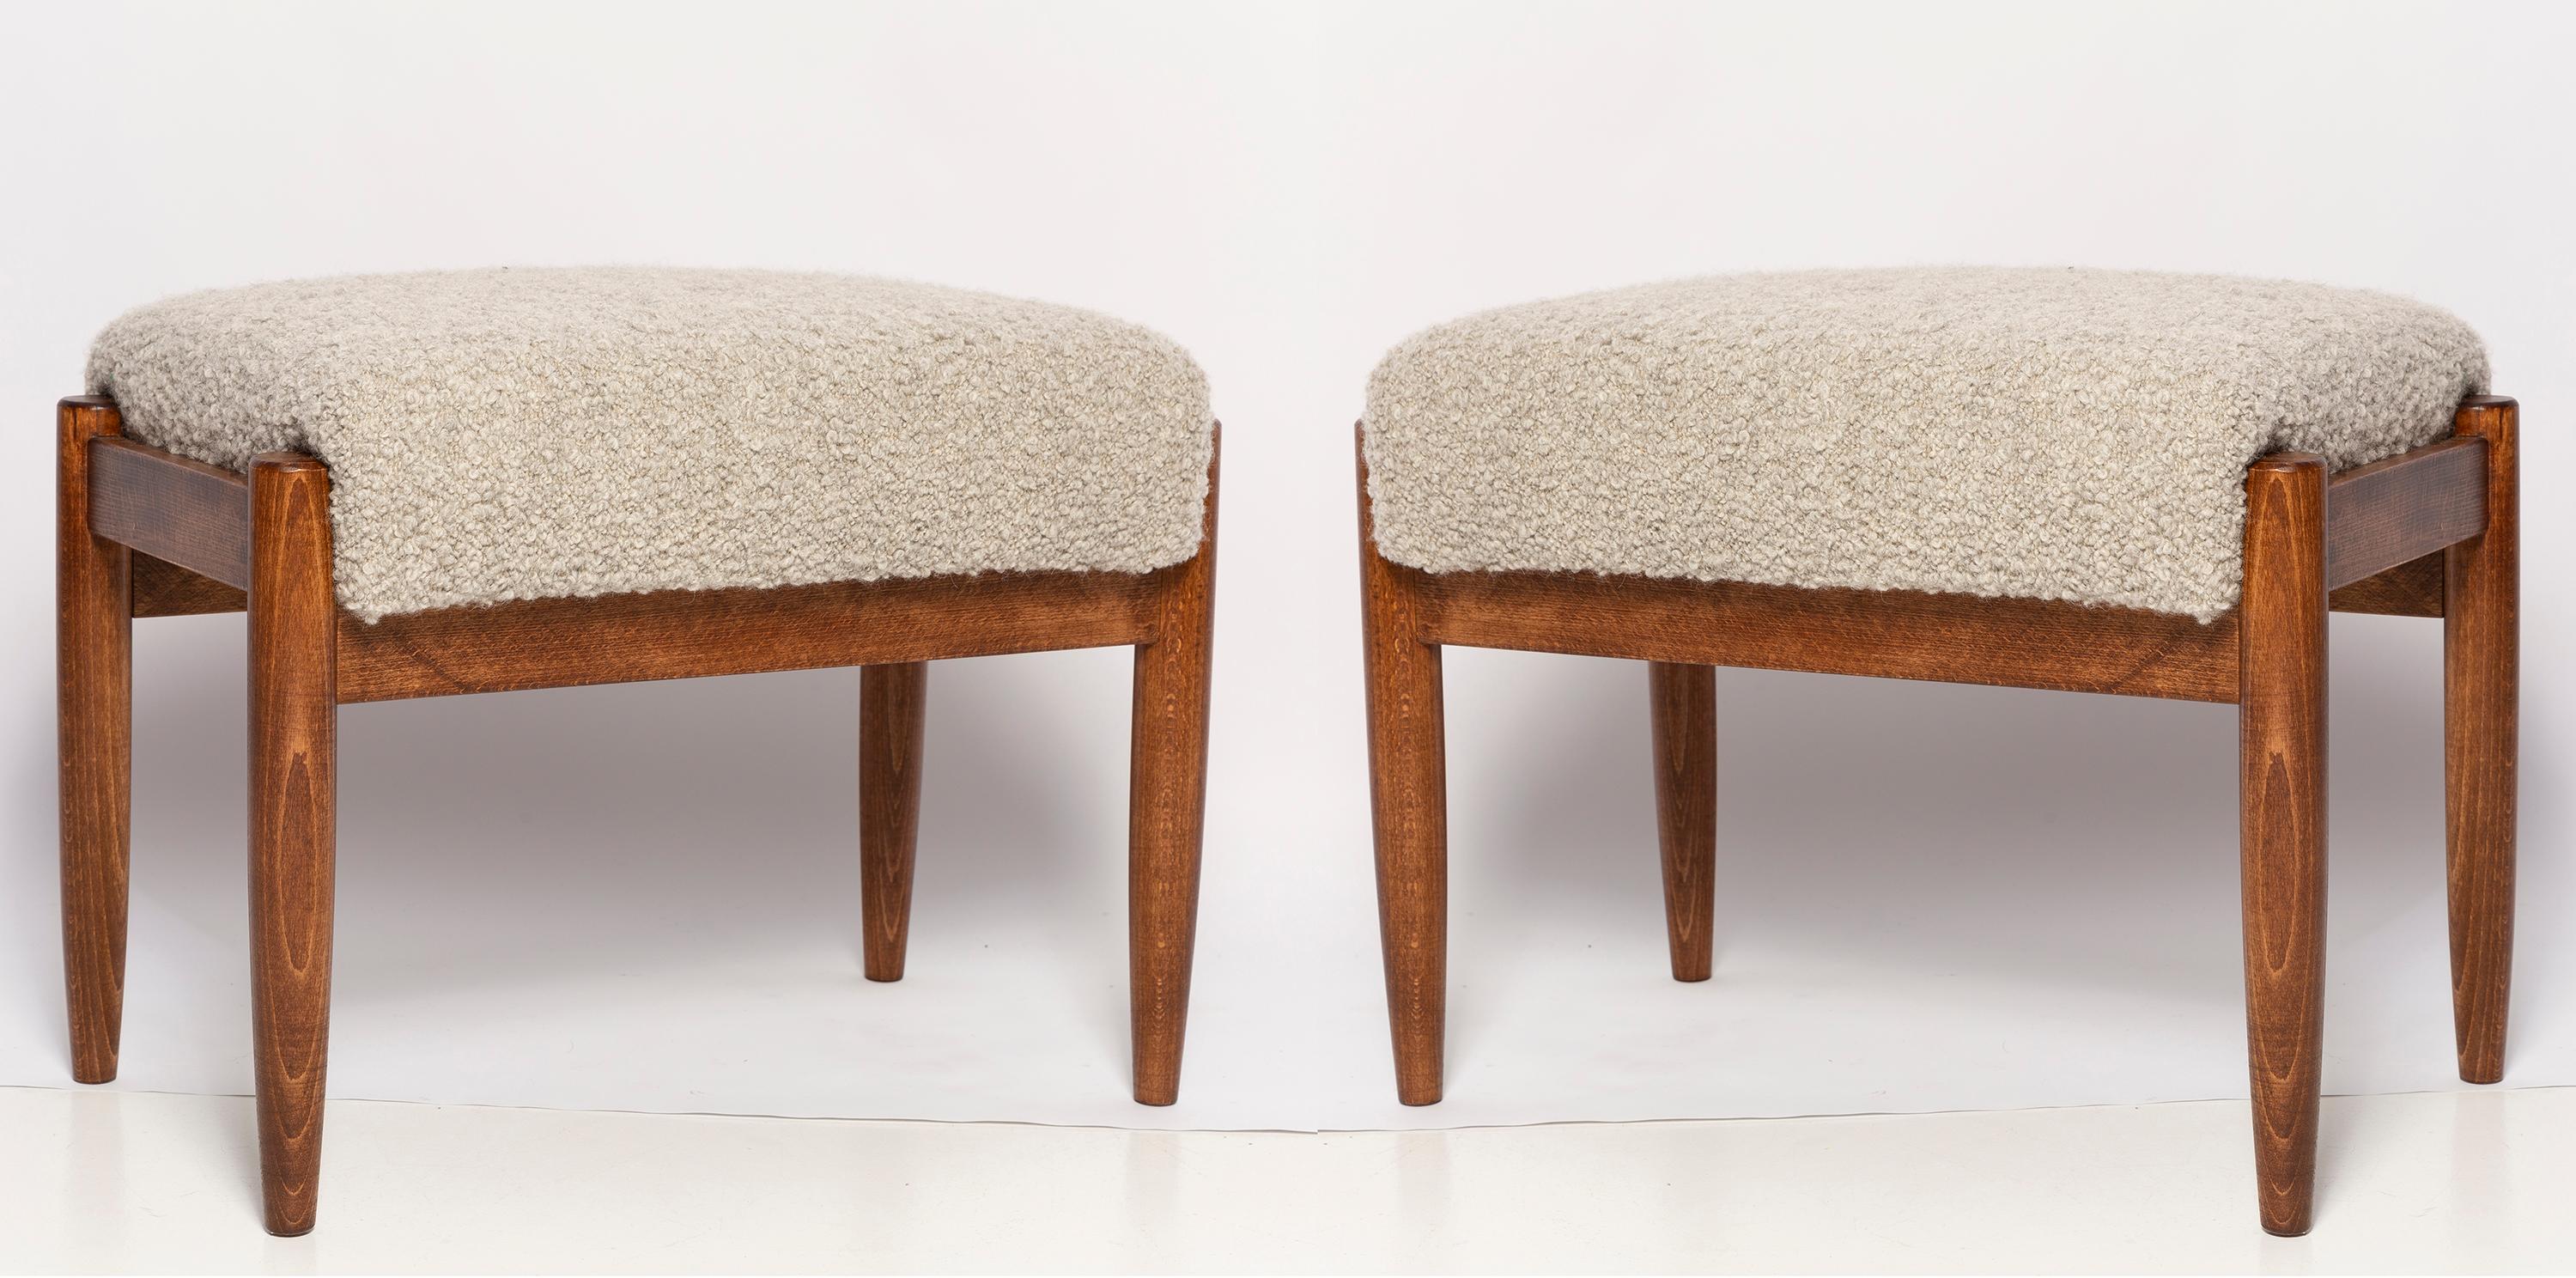 Hand-Crafted Pair of Midcentury Gray Alpaca Wool Stools, Edmund Homa, Poland, 1960s For Sale